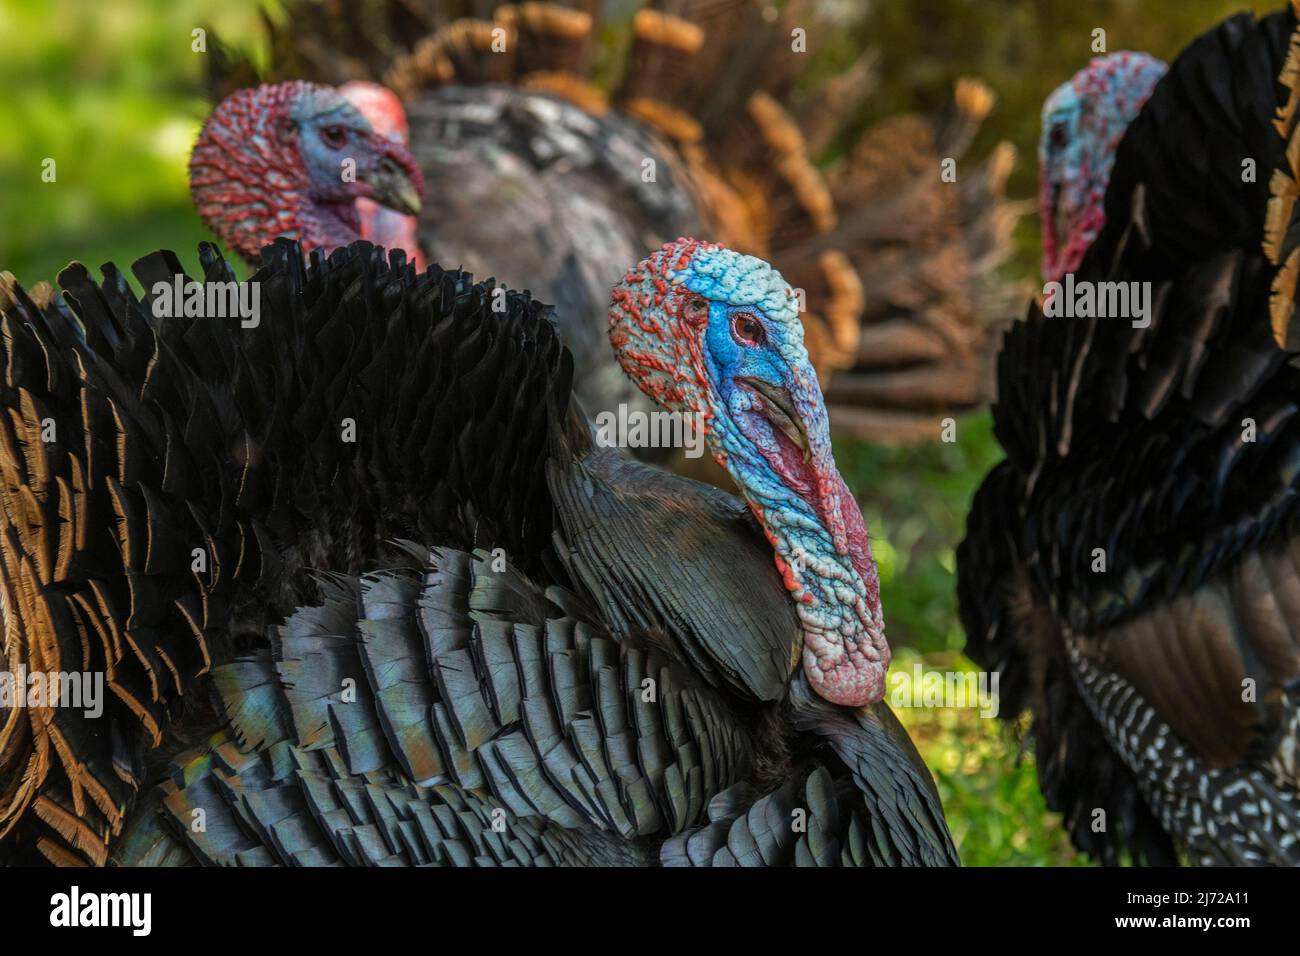 Three wild turkeys (Meleagris gallopavo) males / toms / gobblers showing featherless heads and red wattles on throat and neck, native to North America Stock Photo